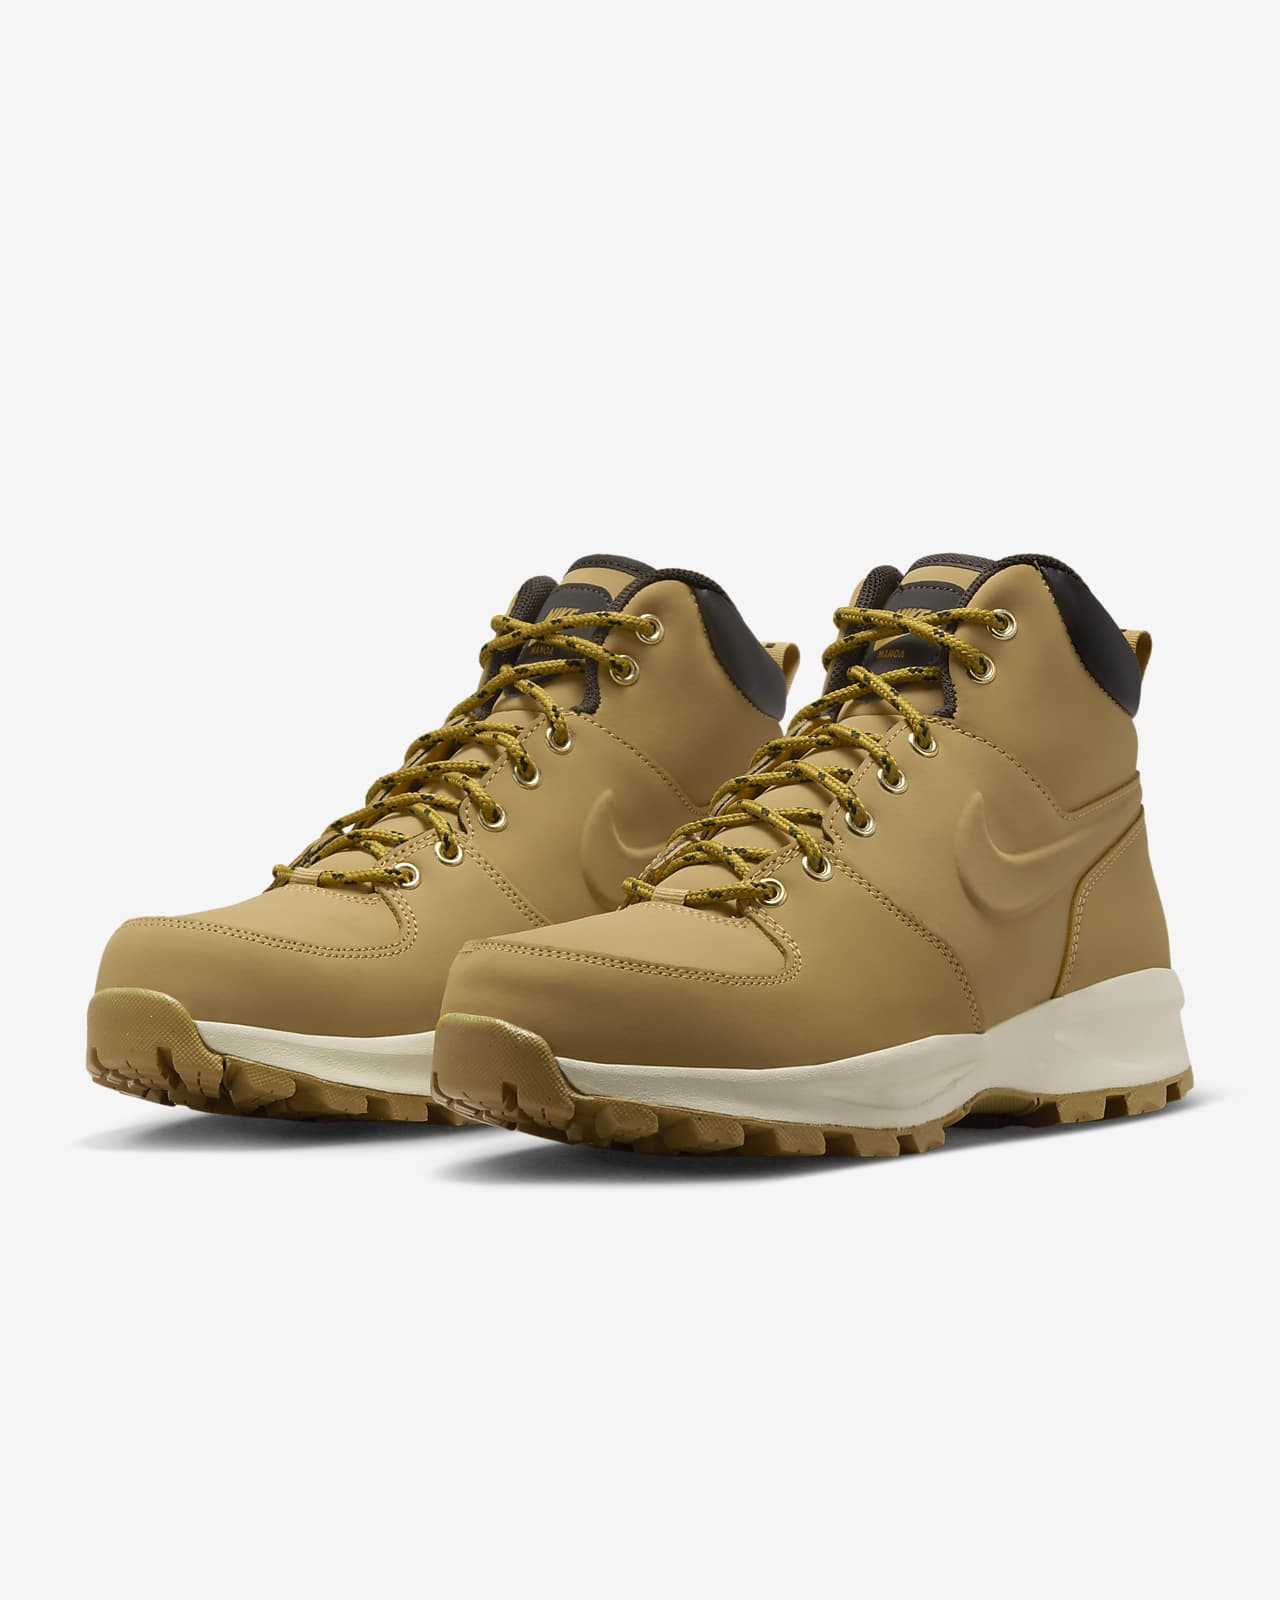 Nike Manoa Leather Men\'s Boots